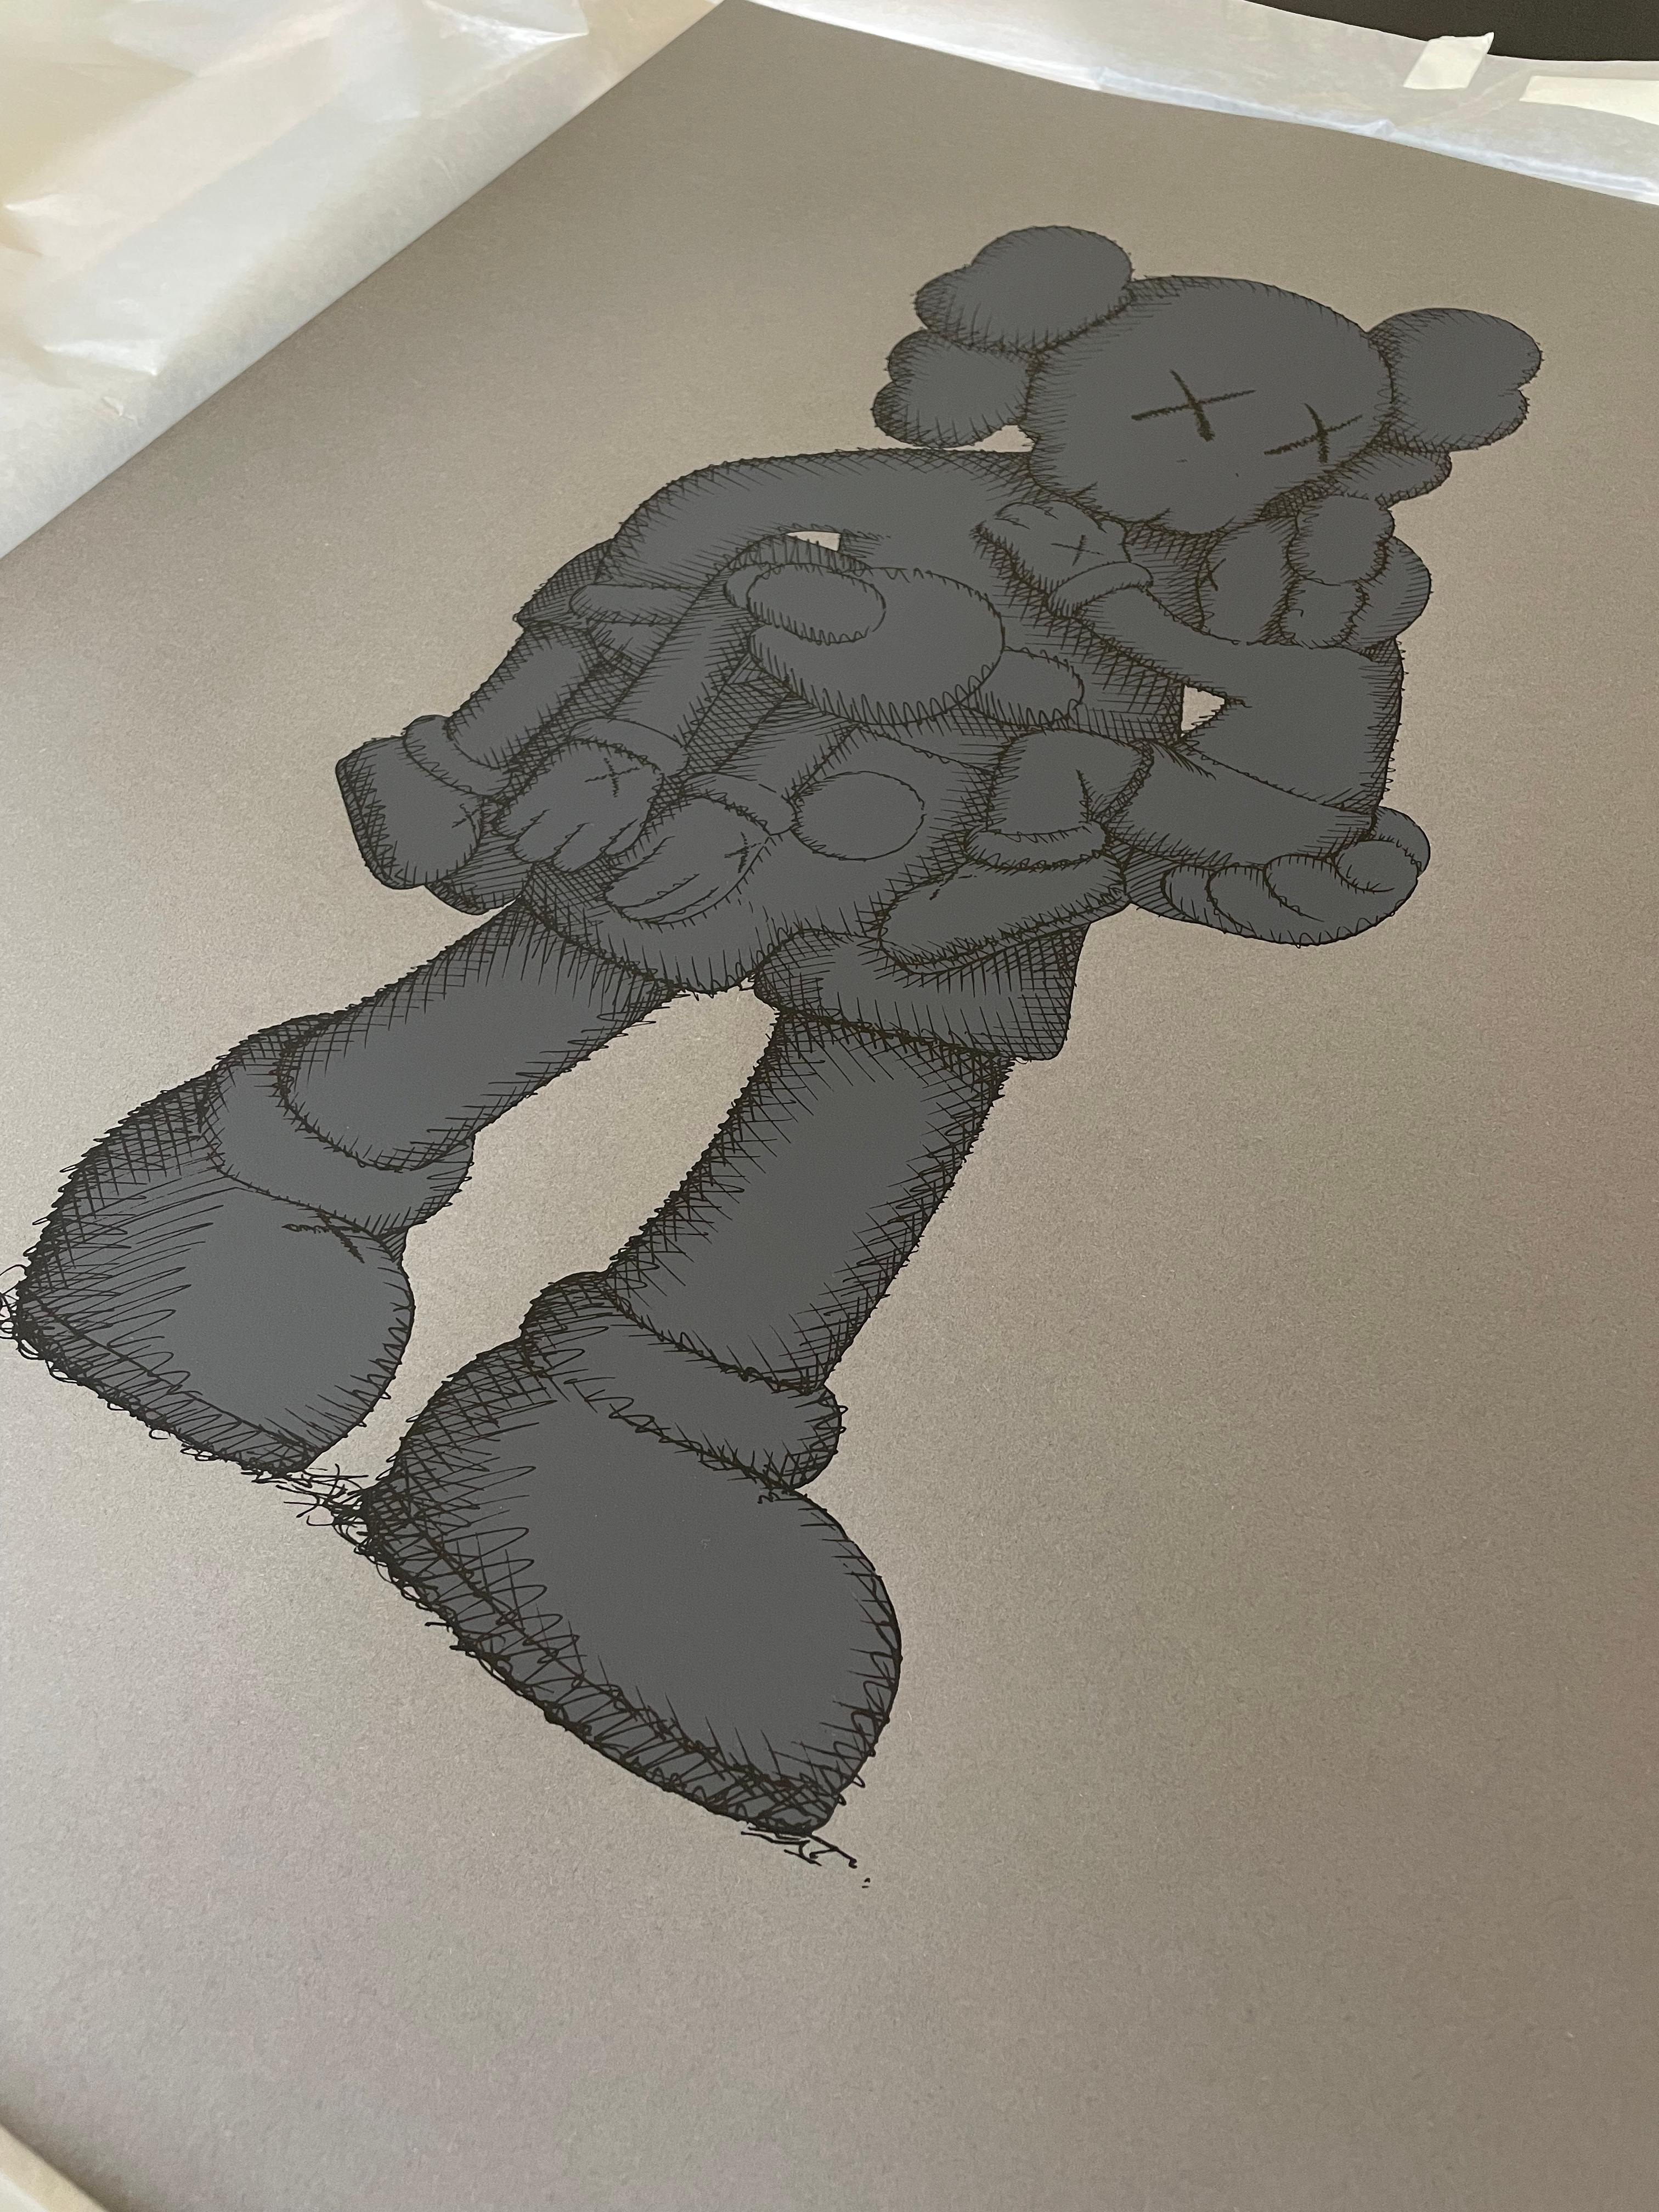 Limited Edition of 100
Screen print on Colorplan Dark Grey paper.
Publisher - Kaws in collaboration with The Modern shop.

30 × 24 in
76.2 × 61 cm